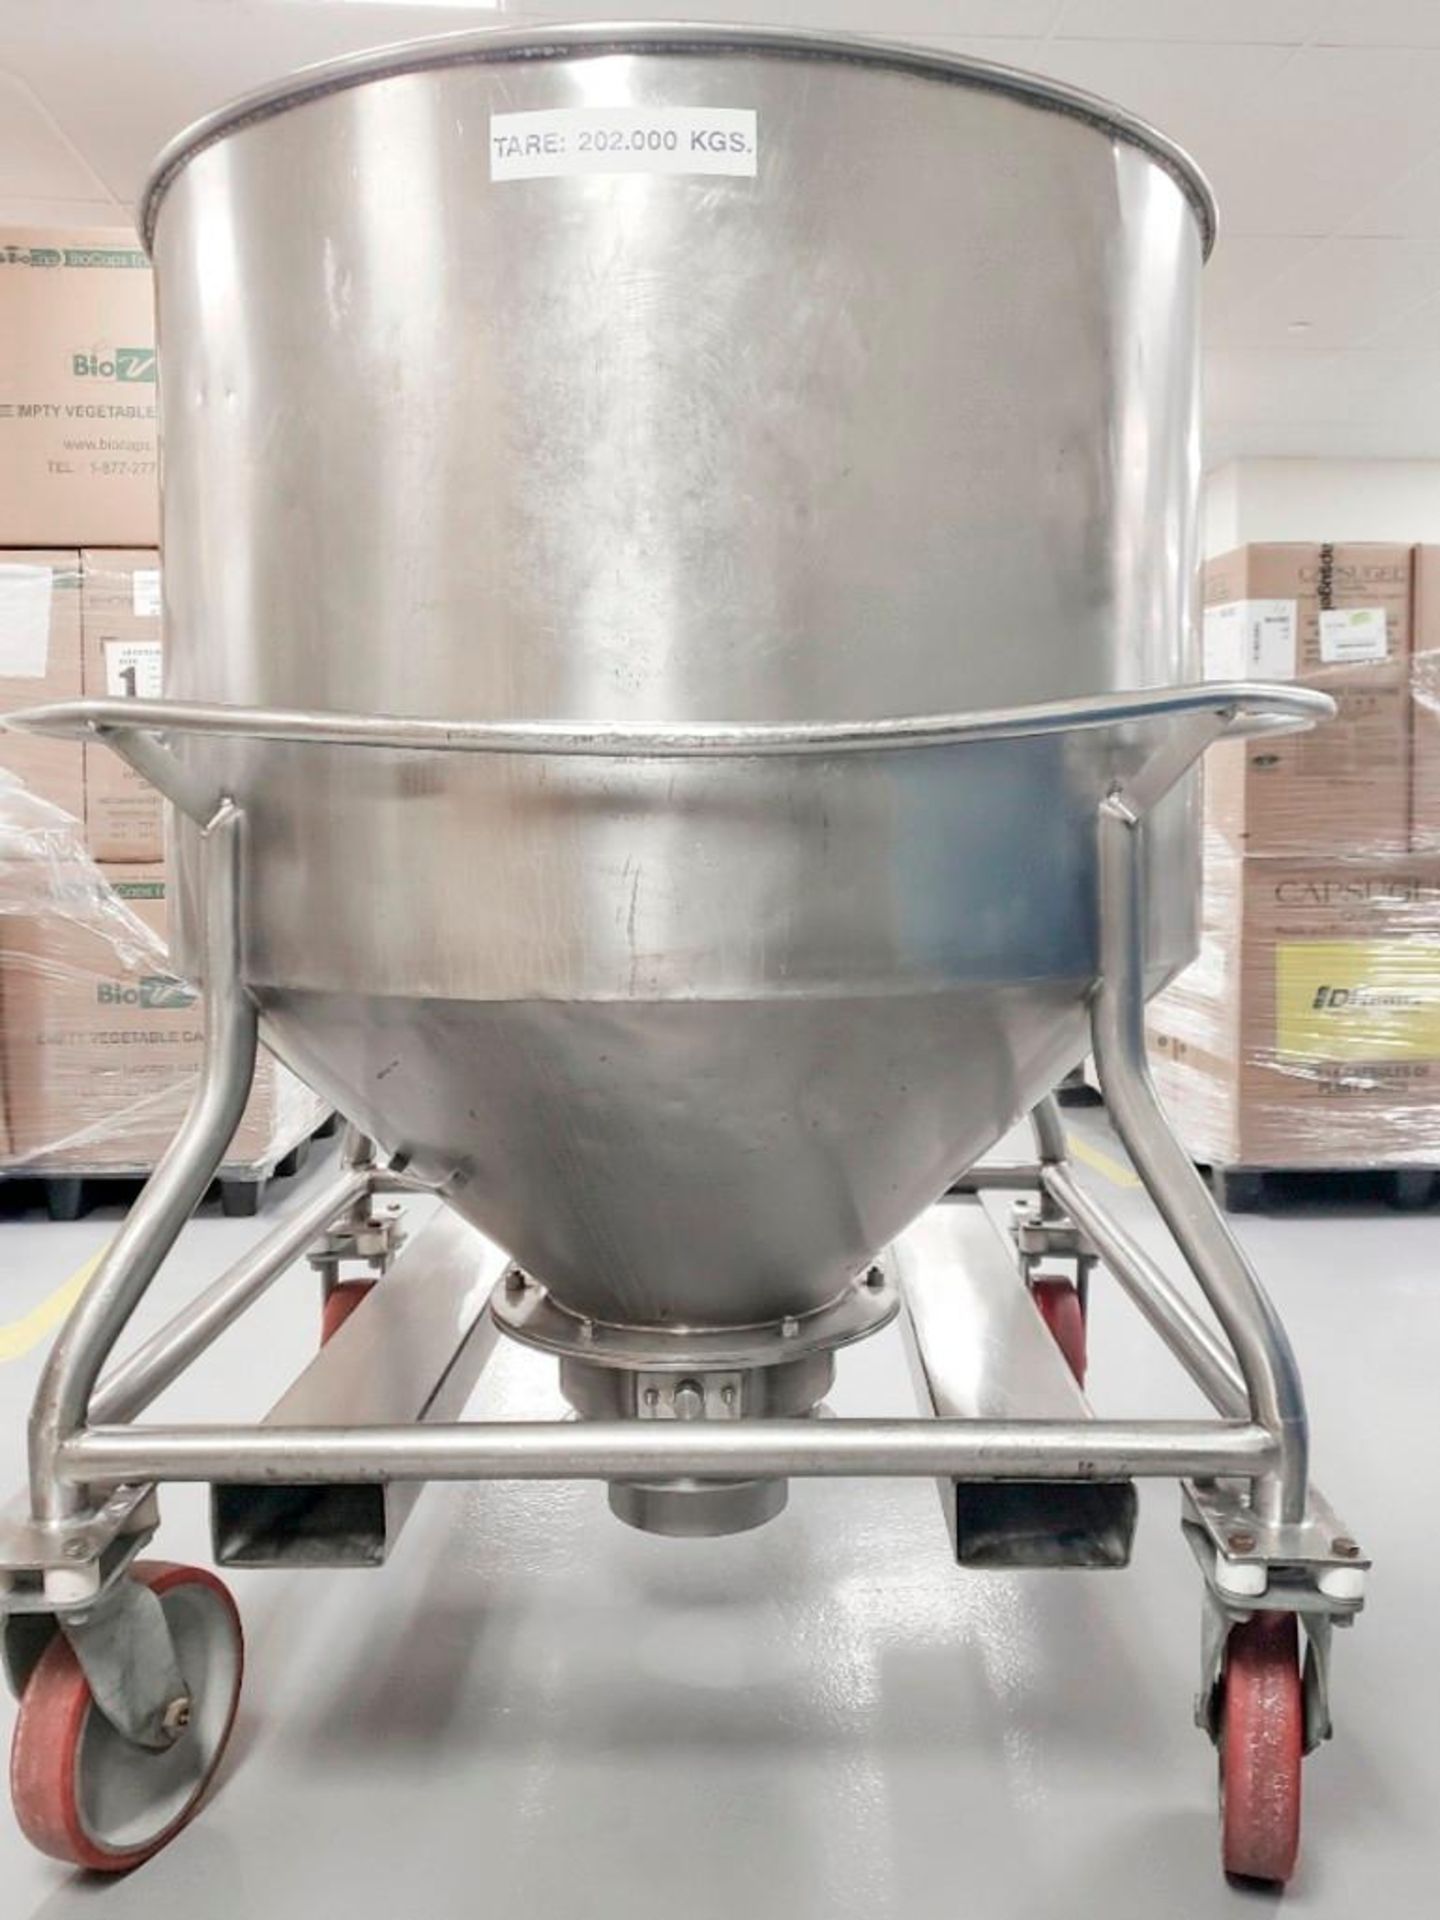 700Kg Capacity Charge Kettle - Image 2 of 12